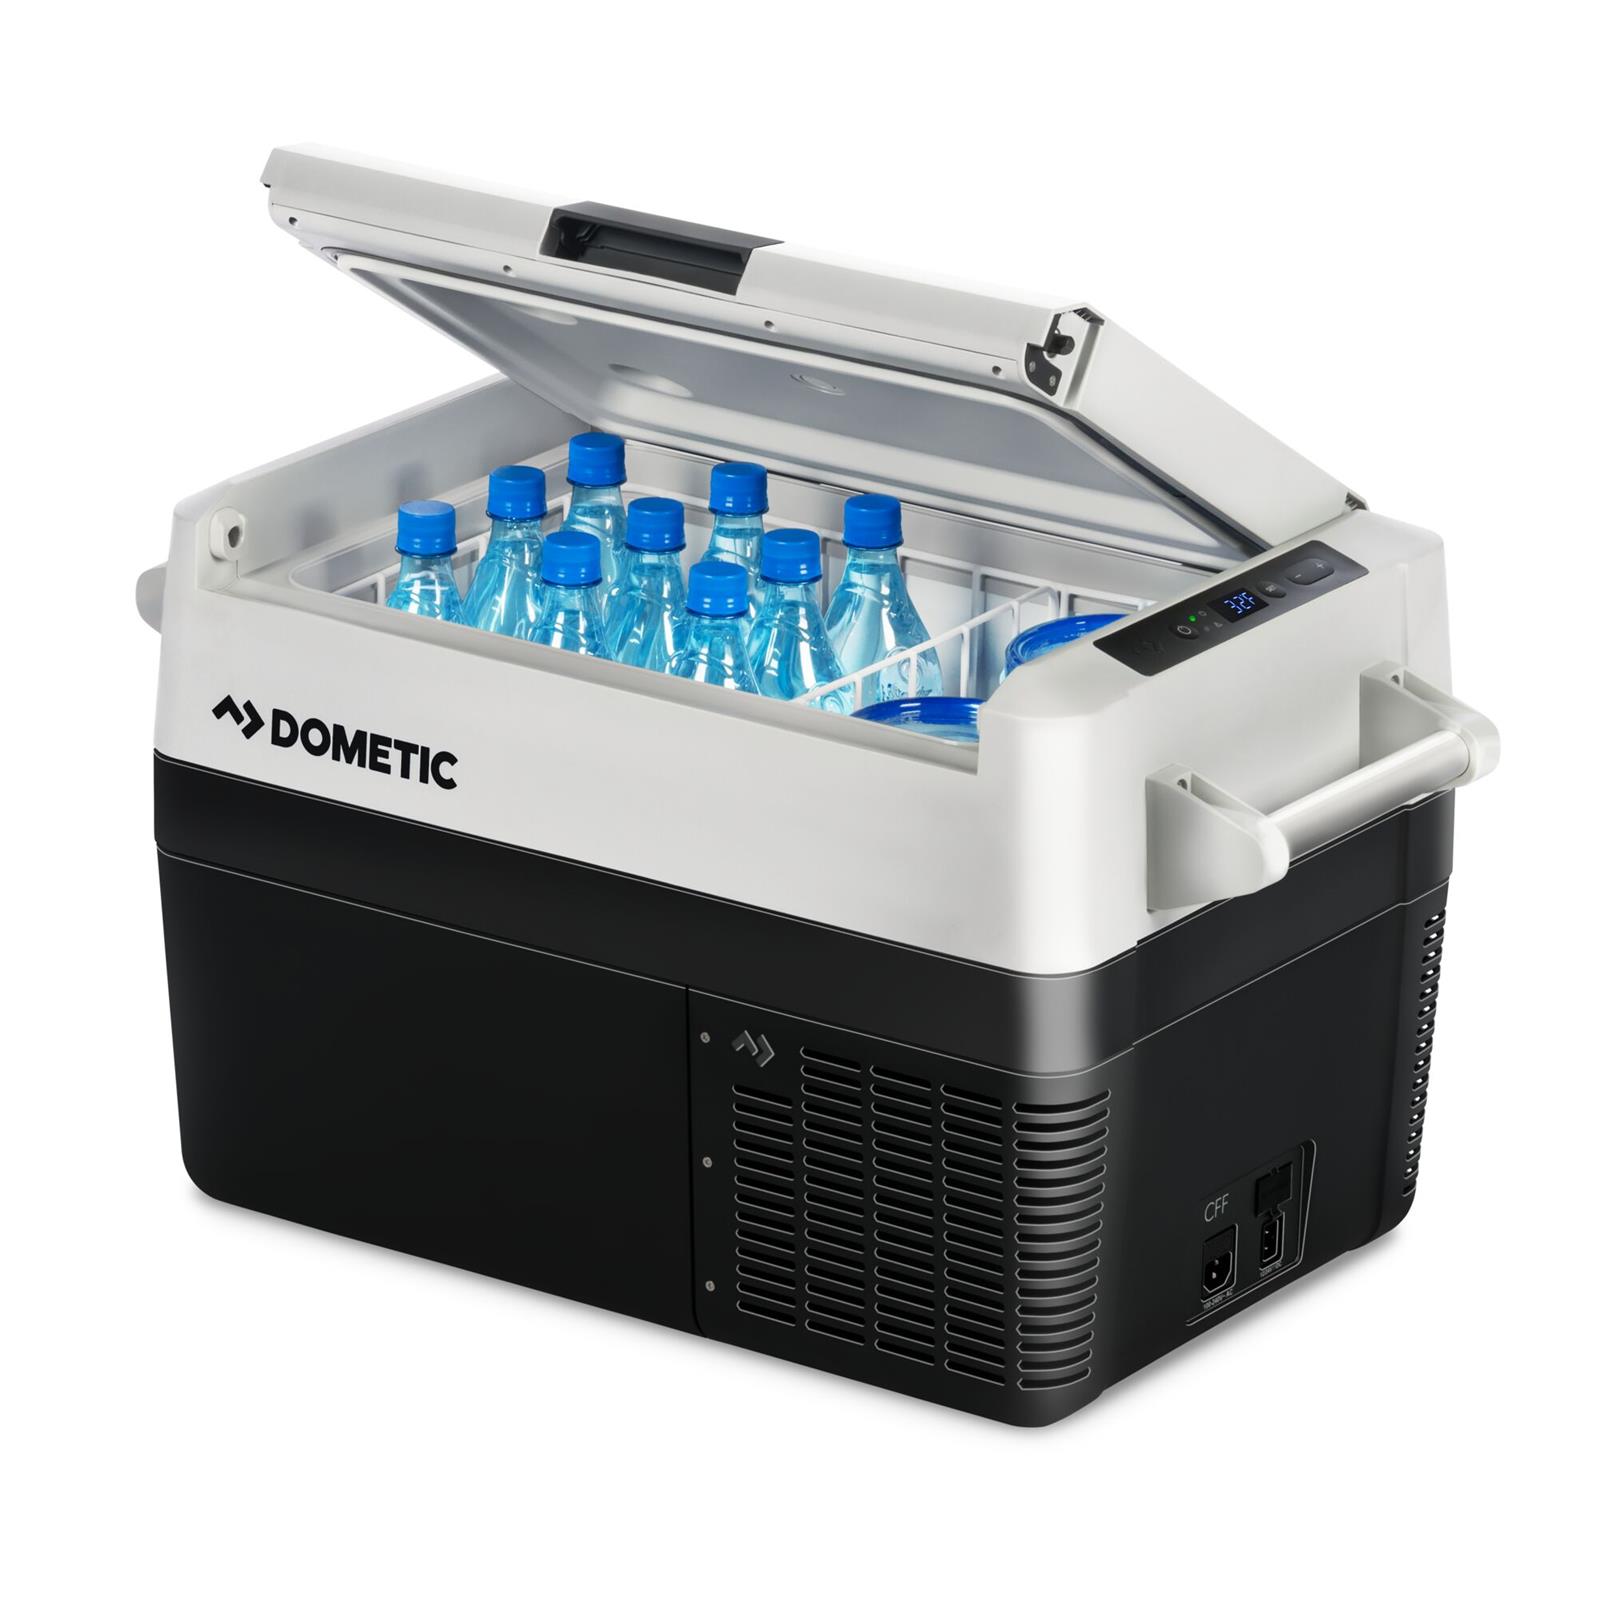 Dometic Cff 35 Powered Cooler